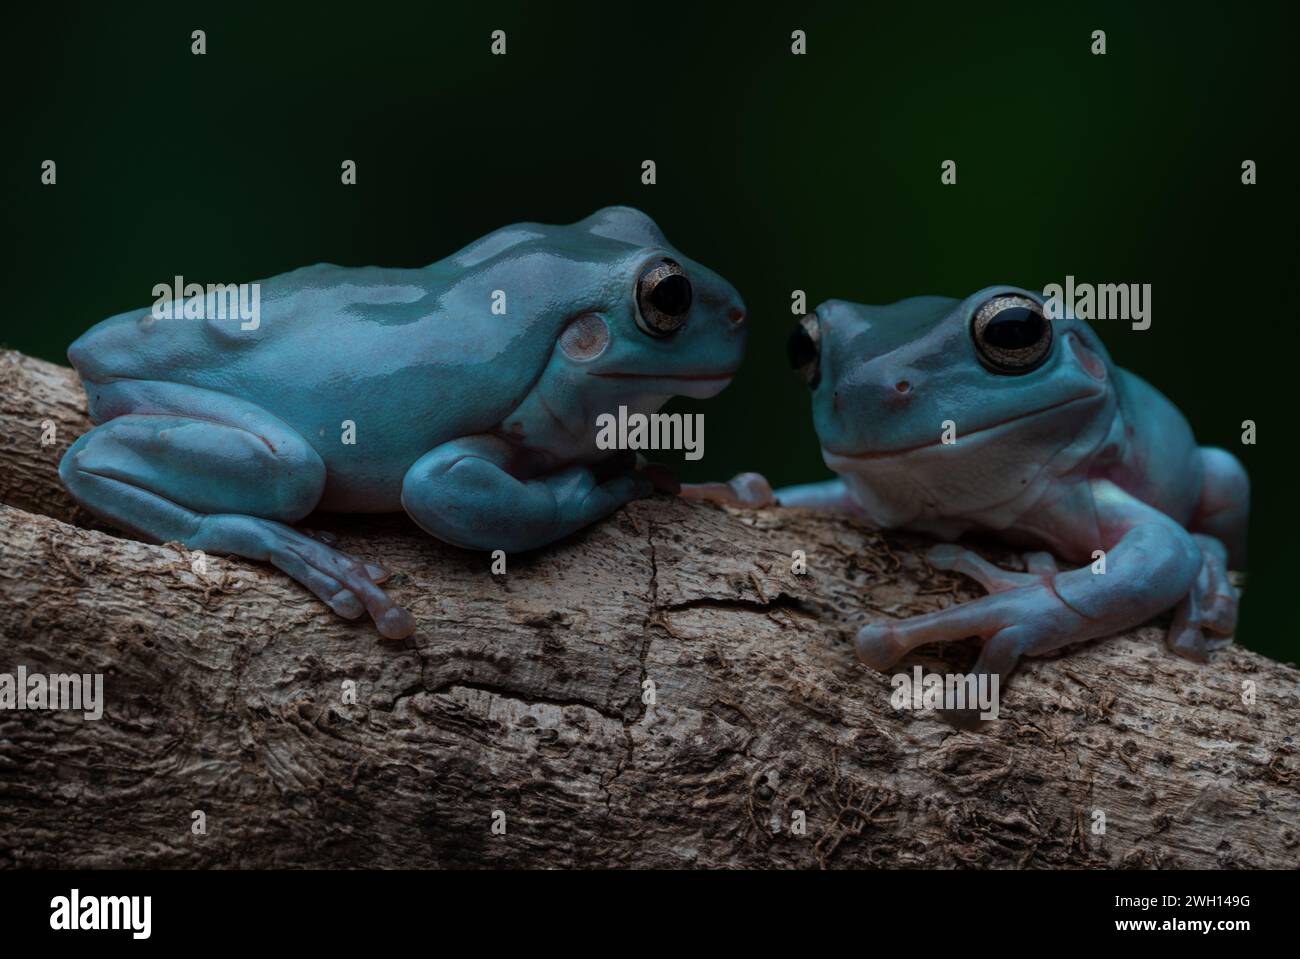 A Blue Dumpy Tree Frogs perched on a tree trunk amidst a contrasting dark backdrop Stock Photo